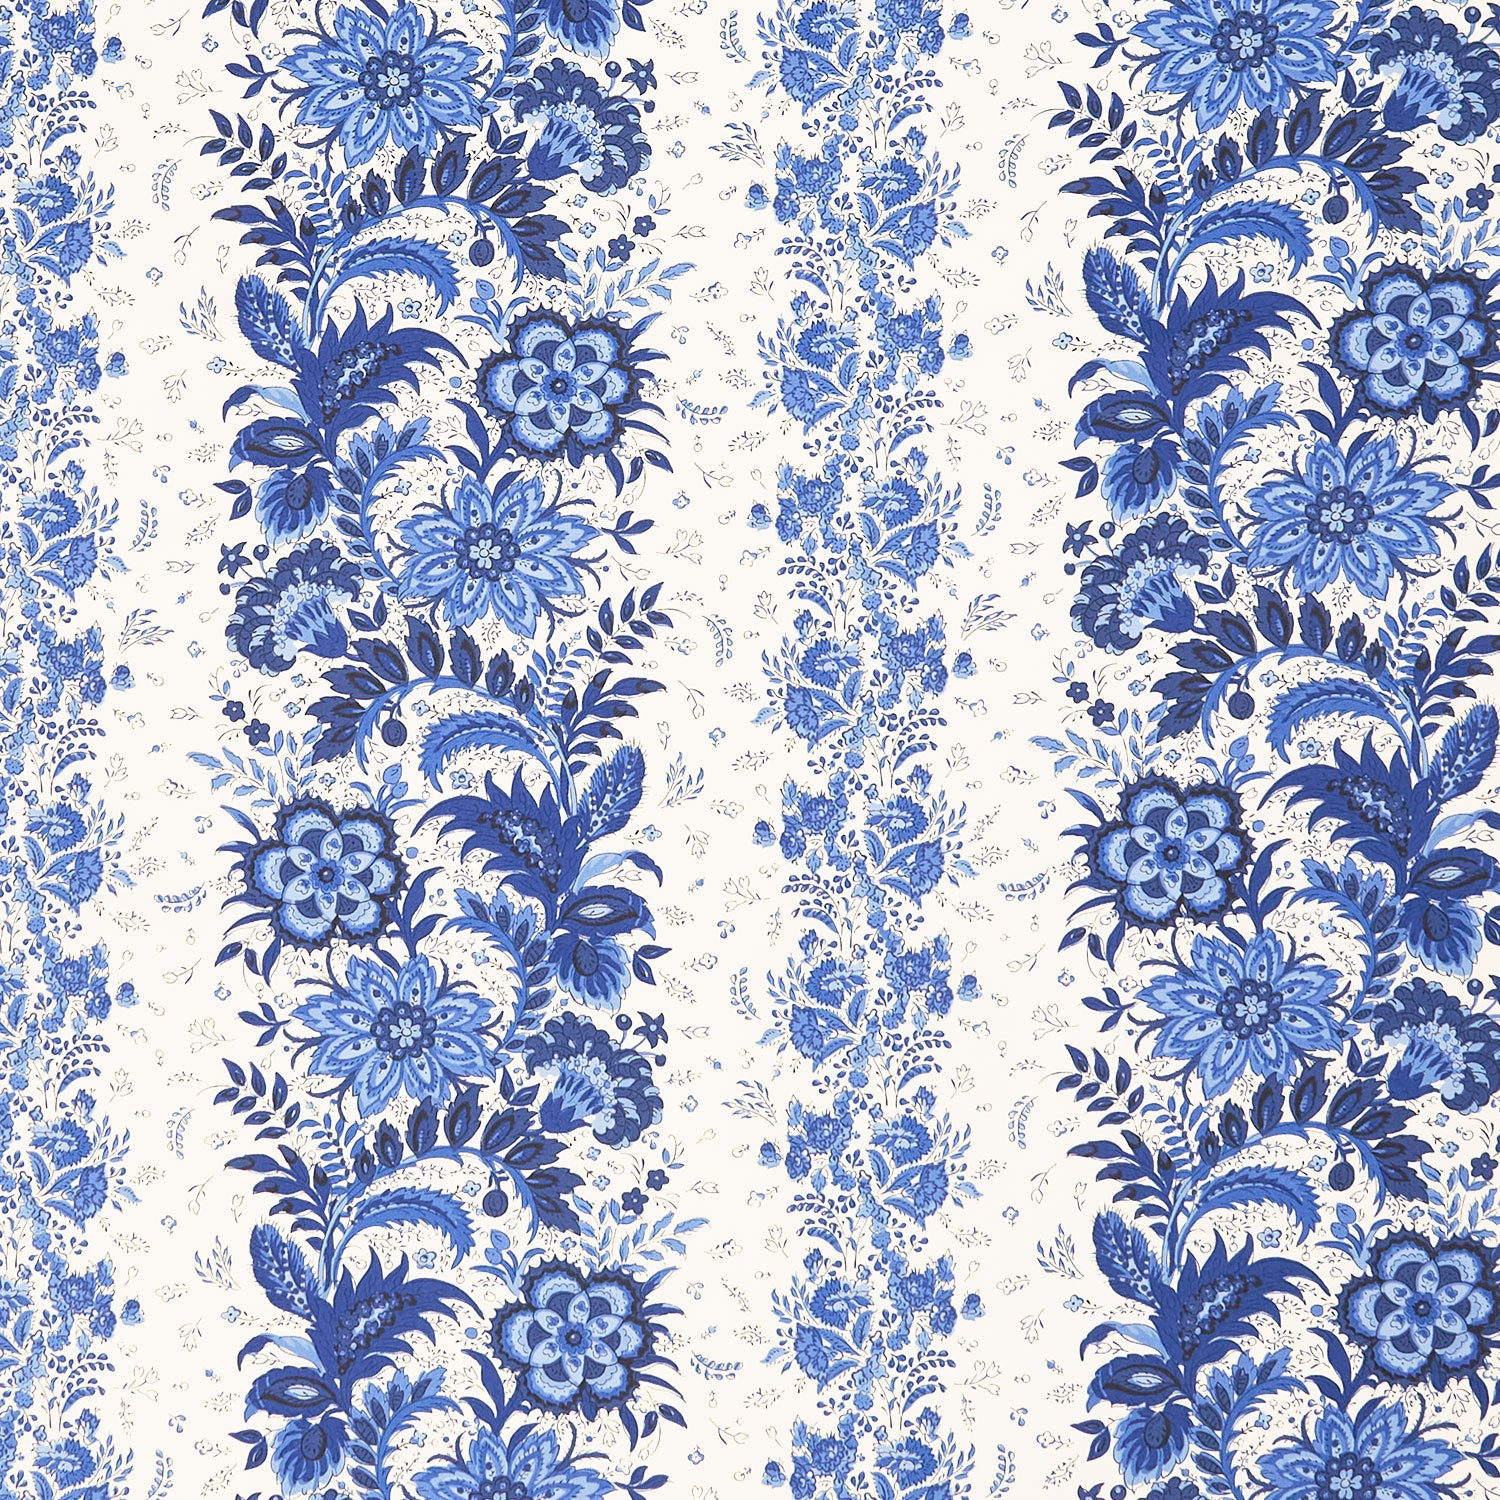 FREE SHIIPING!!! Mineral Blue Guava Ditsy Floral Pattern Printed on French  Terry Fabric, DIY Projects-Print Fabric 